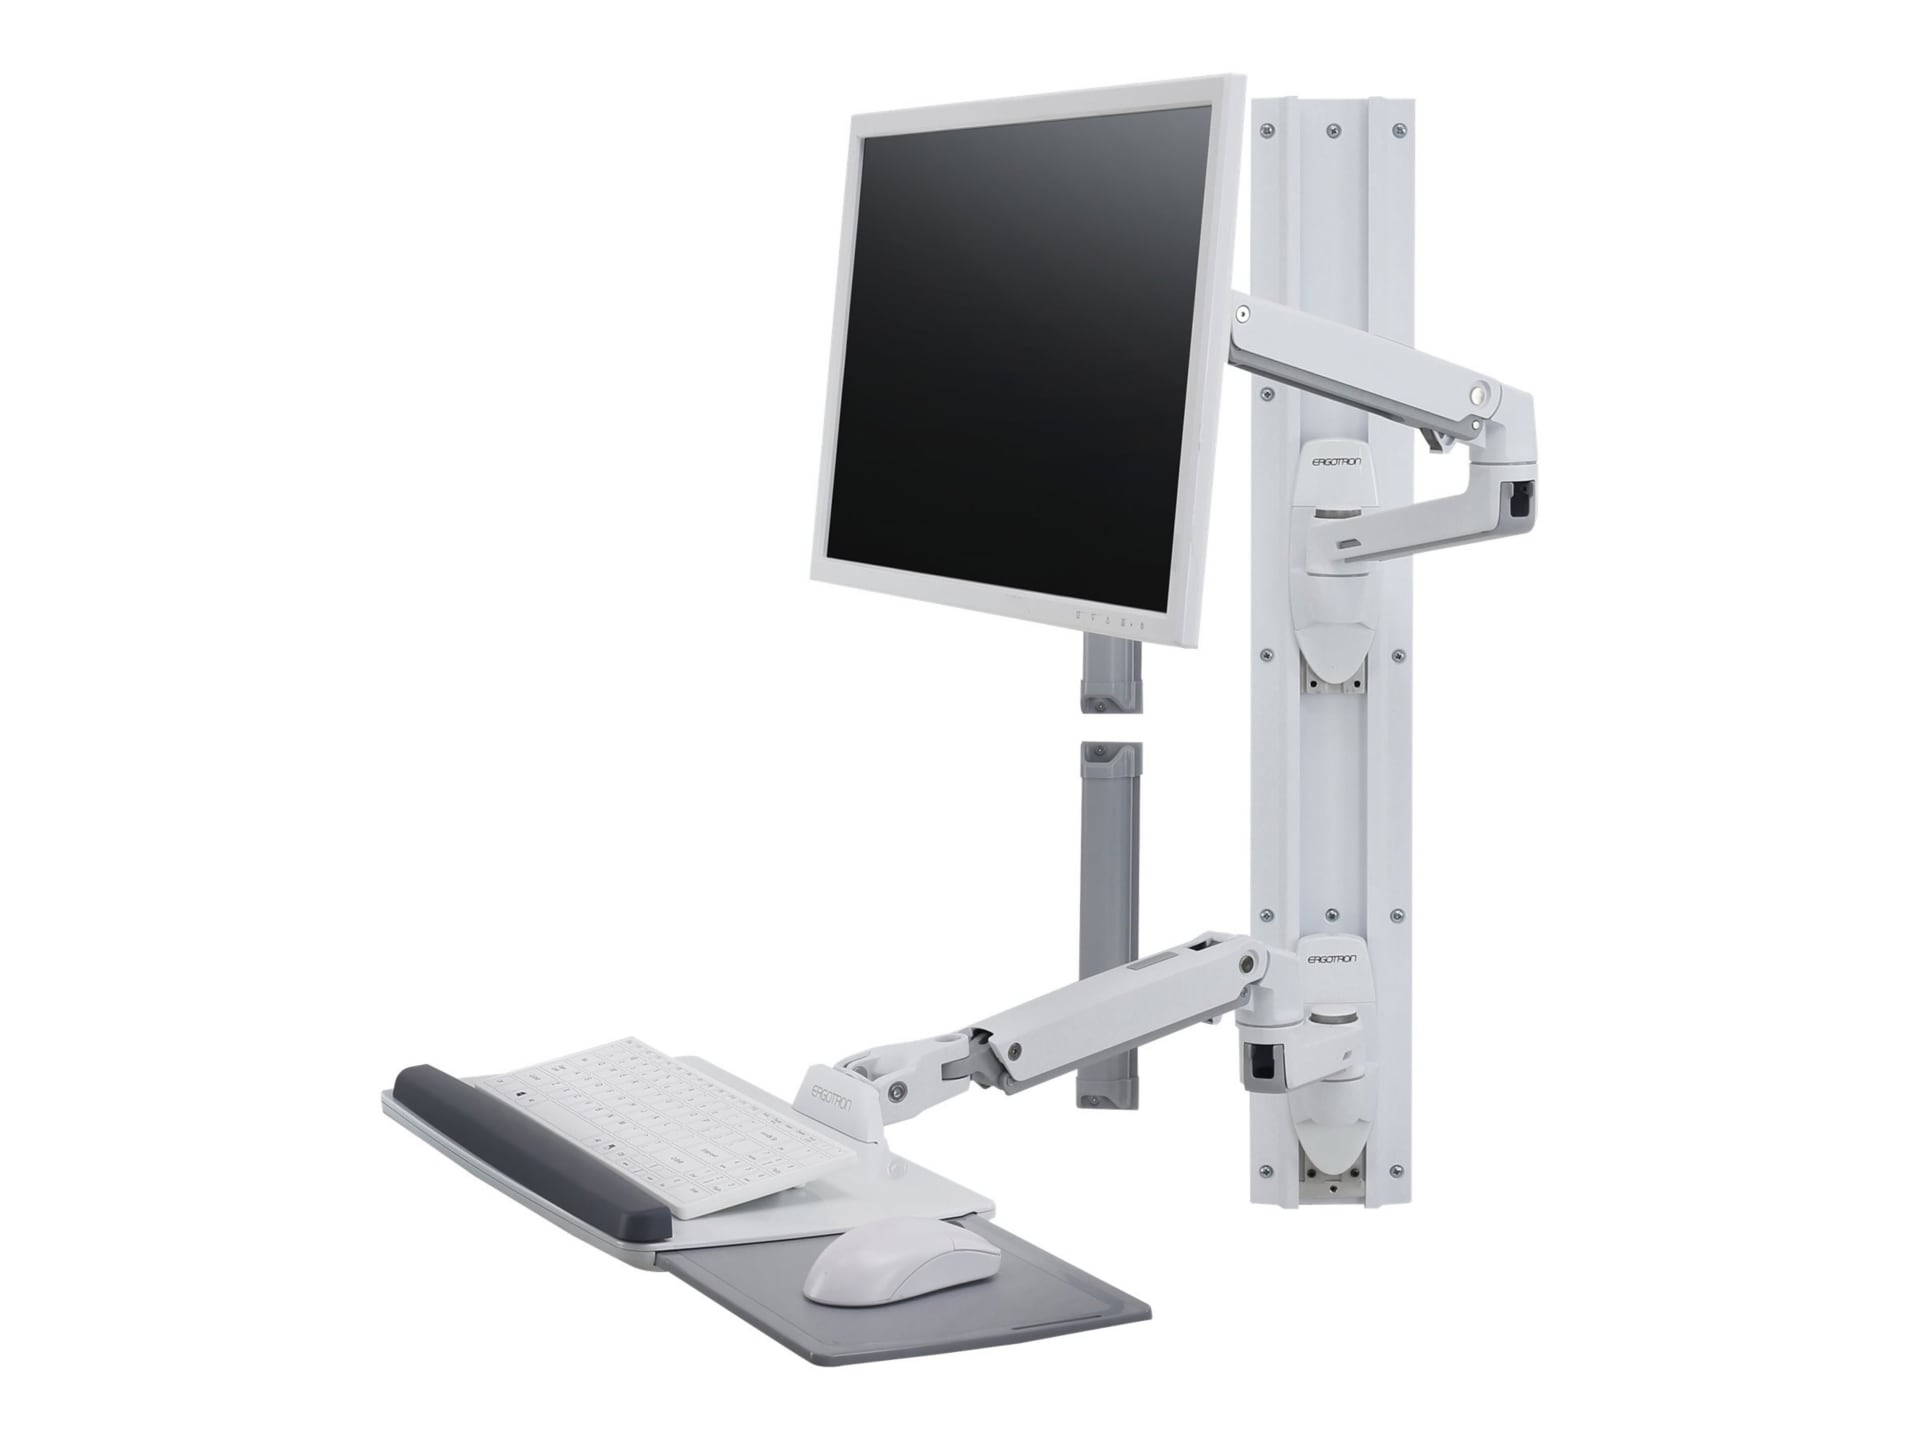 Ergotron LX Wall Mount System mounting kit - Patented Constant Force Technology - for LCD display / keyboard / mouse -